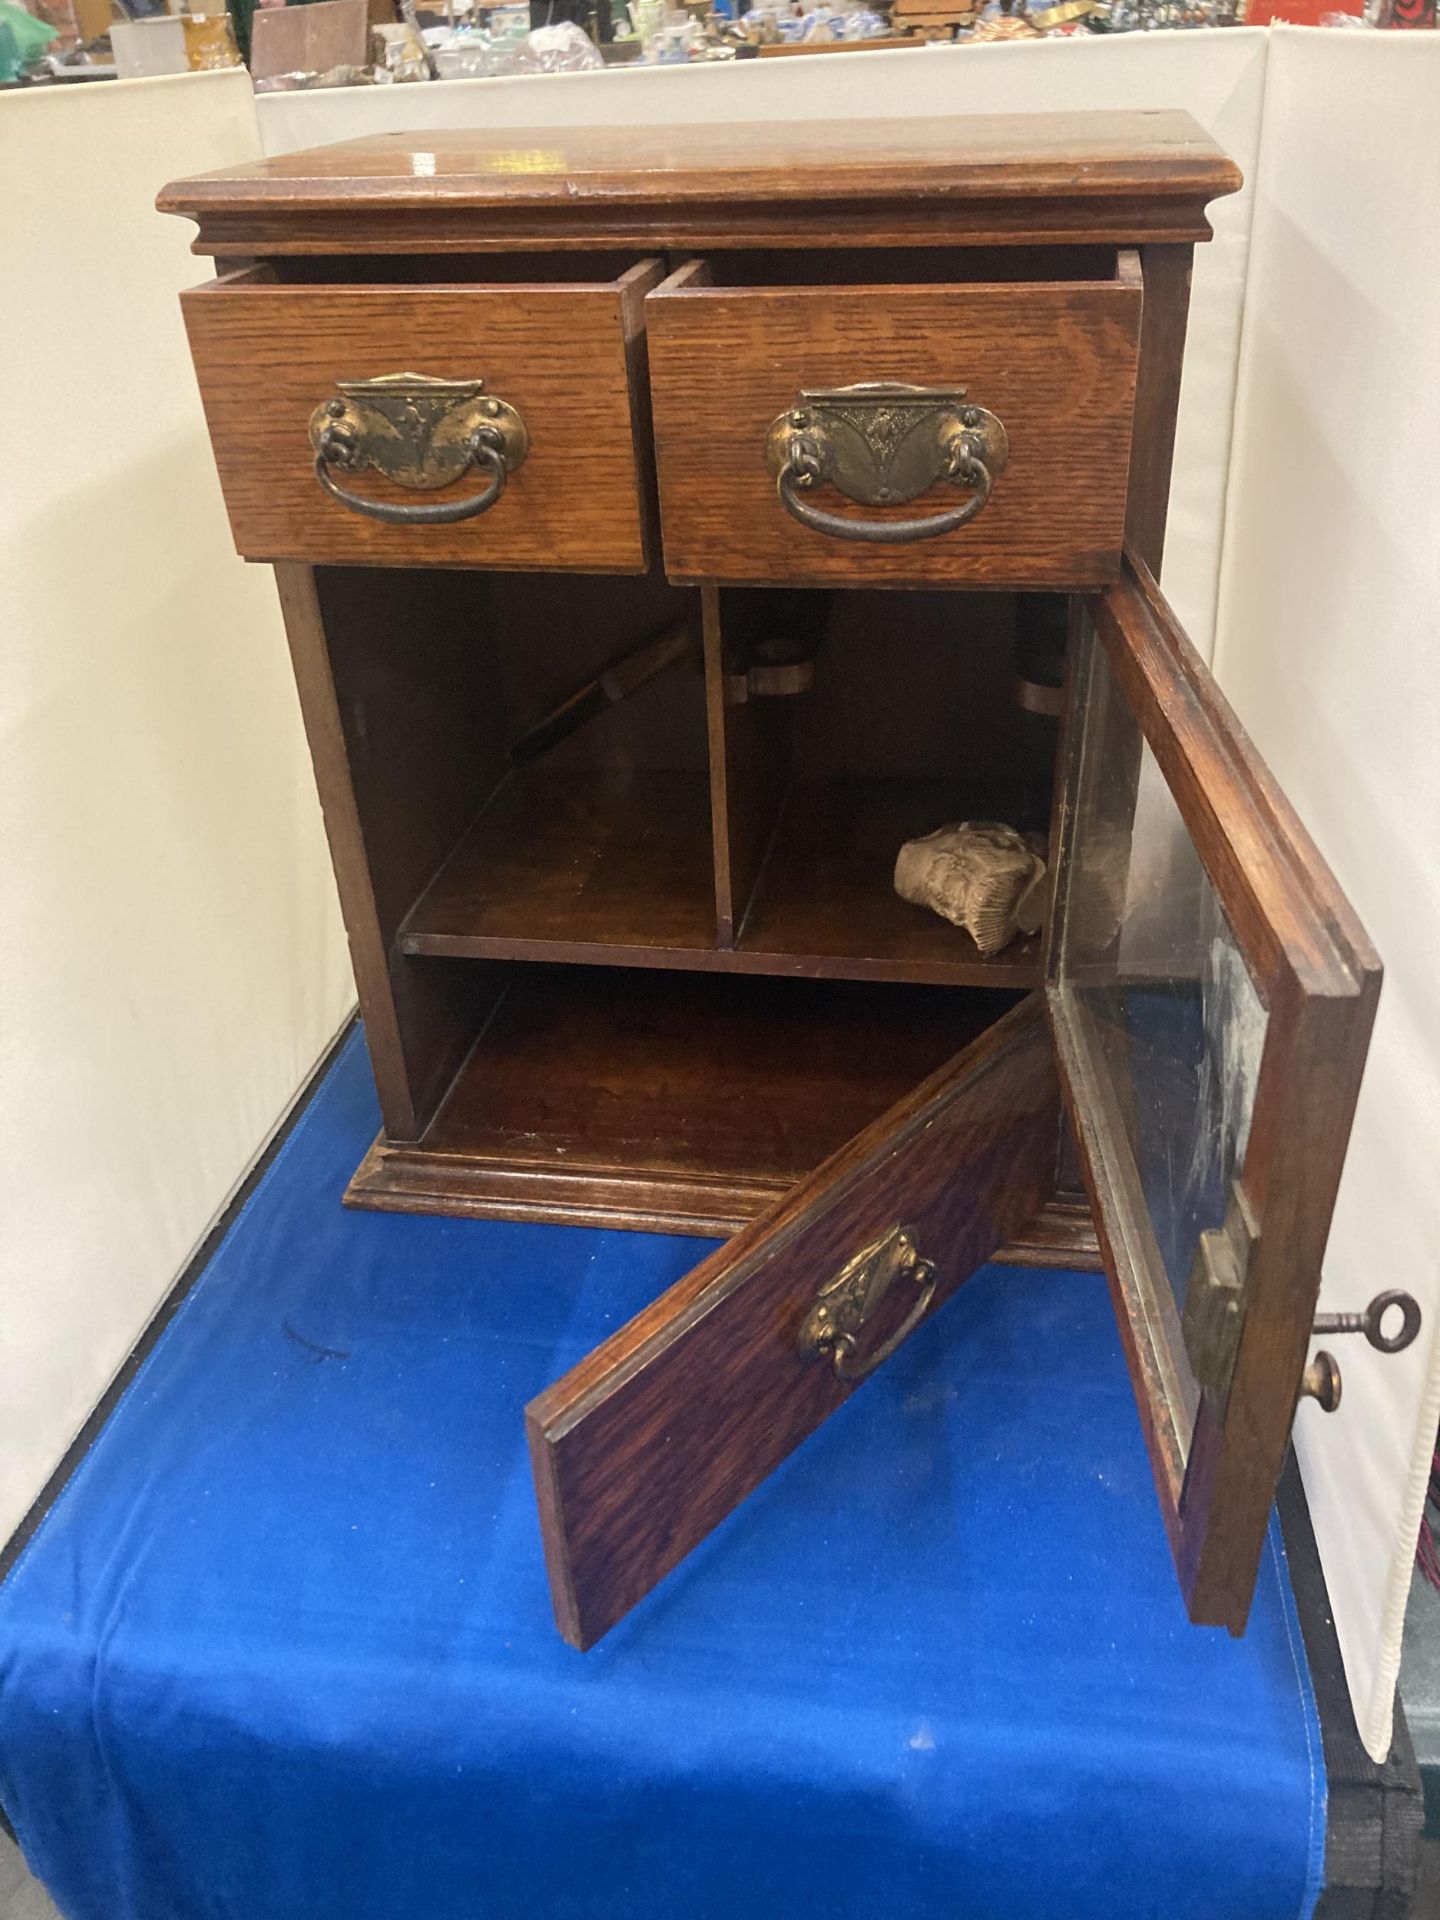 A VINTAGE OAK SMOKERS CABINET WITH TWO SHORT UPPER DRAWERS, A GLAZED DOOR AND A LONG LOWER DRAWER - Image 2 of 7